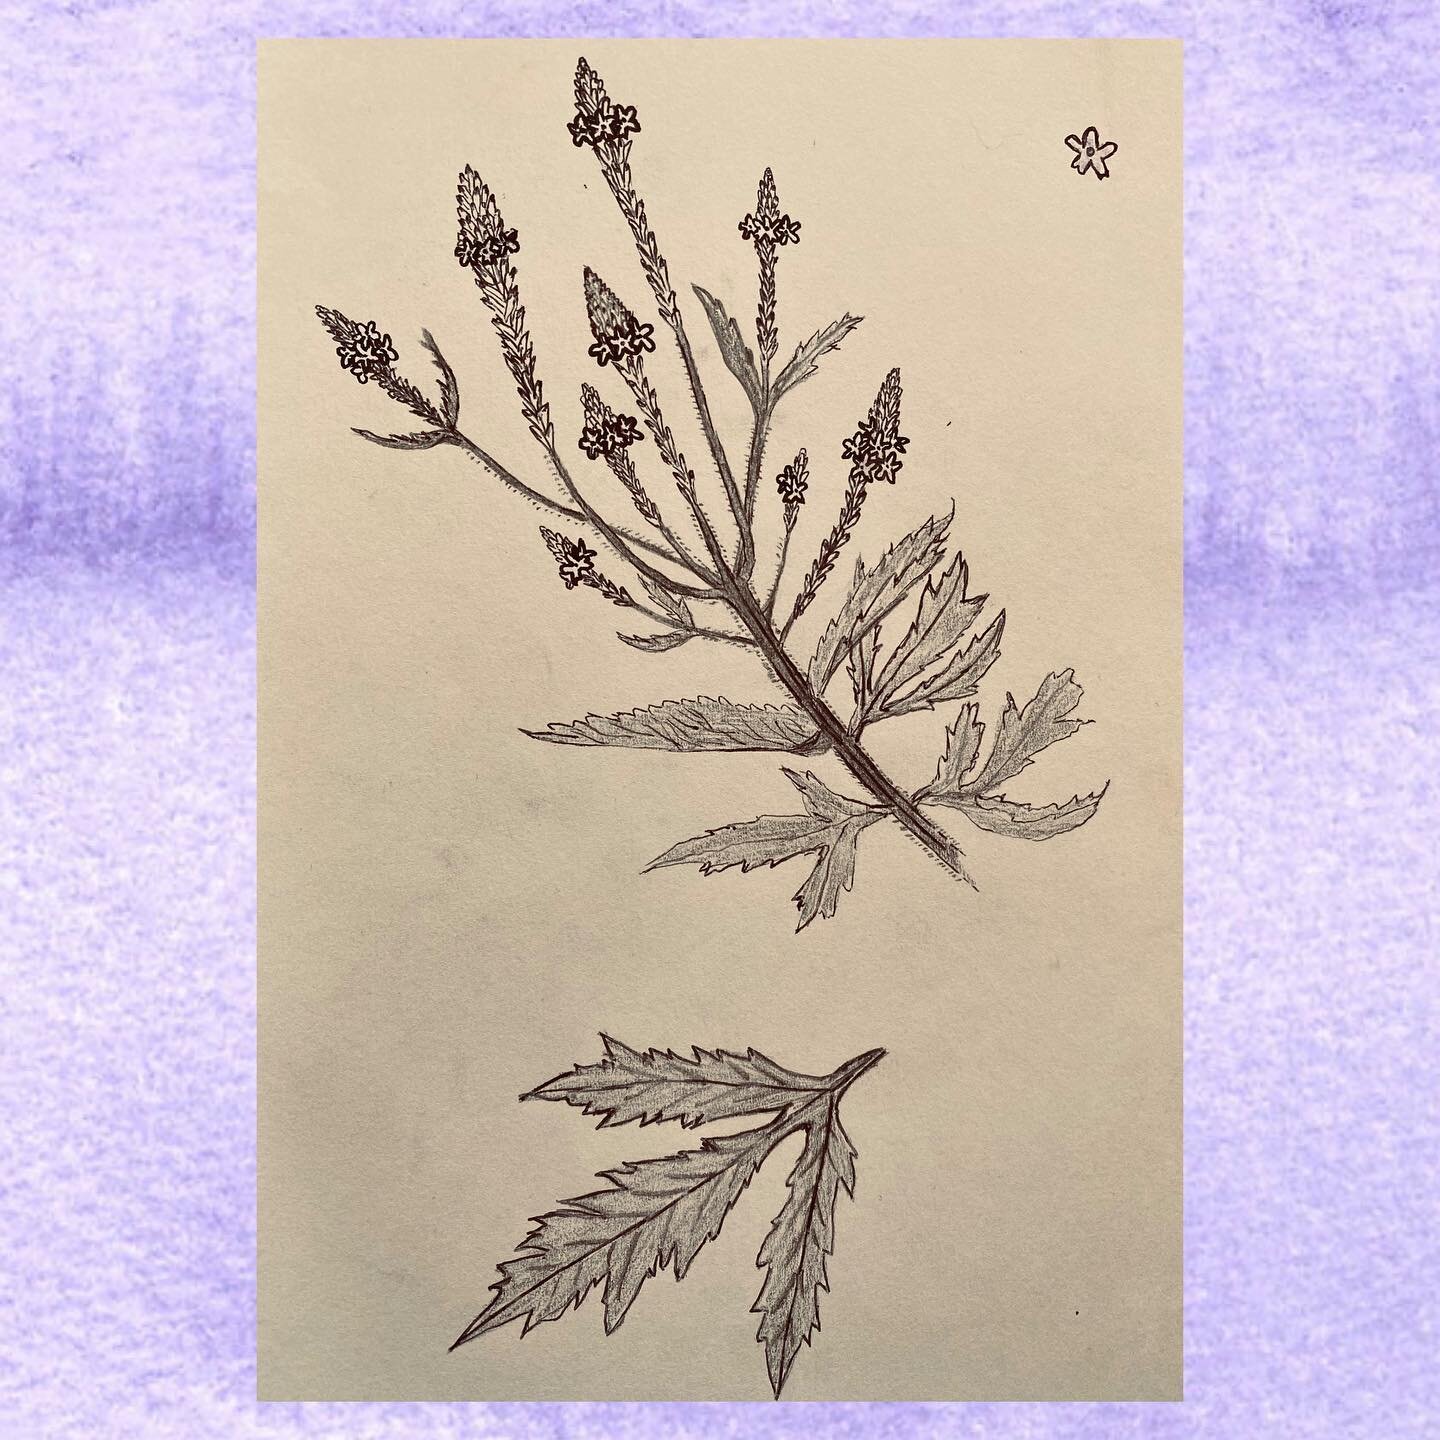 Vervain. ⁣
Loop breaker. ⁣
Code writer. ⁣
Dark space knower. ⁣
Balancing the well of air. ⁣
Dispelling illusion. ⁣
Disrupting chatter. ⁣
The iron herb: a blade to cut through time. ⁣
⁣
To learn more about this herb, the well of air, and their connect